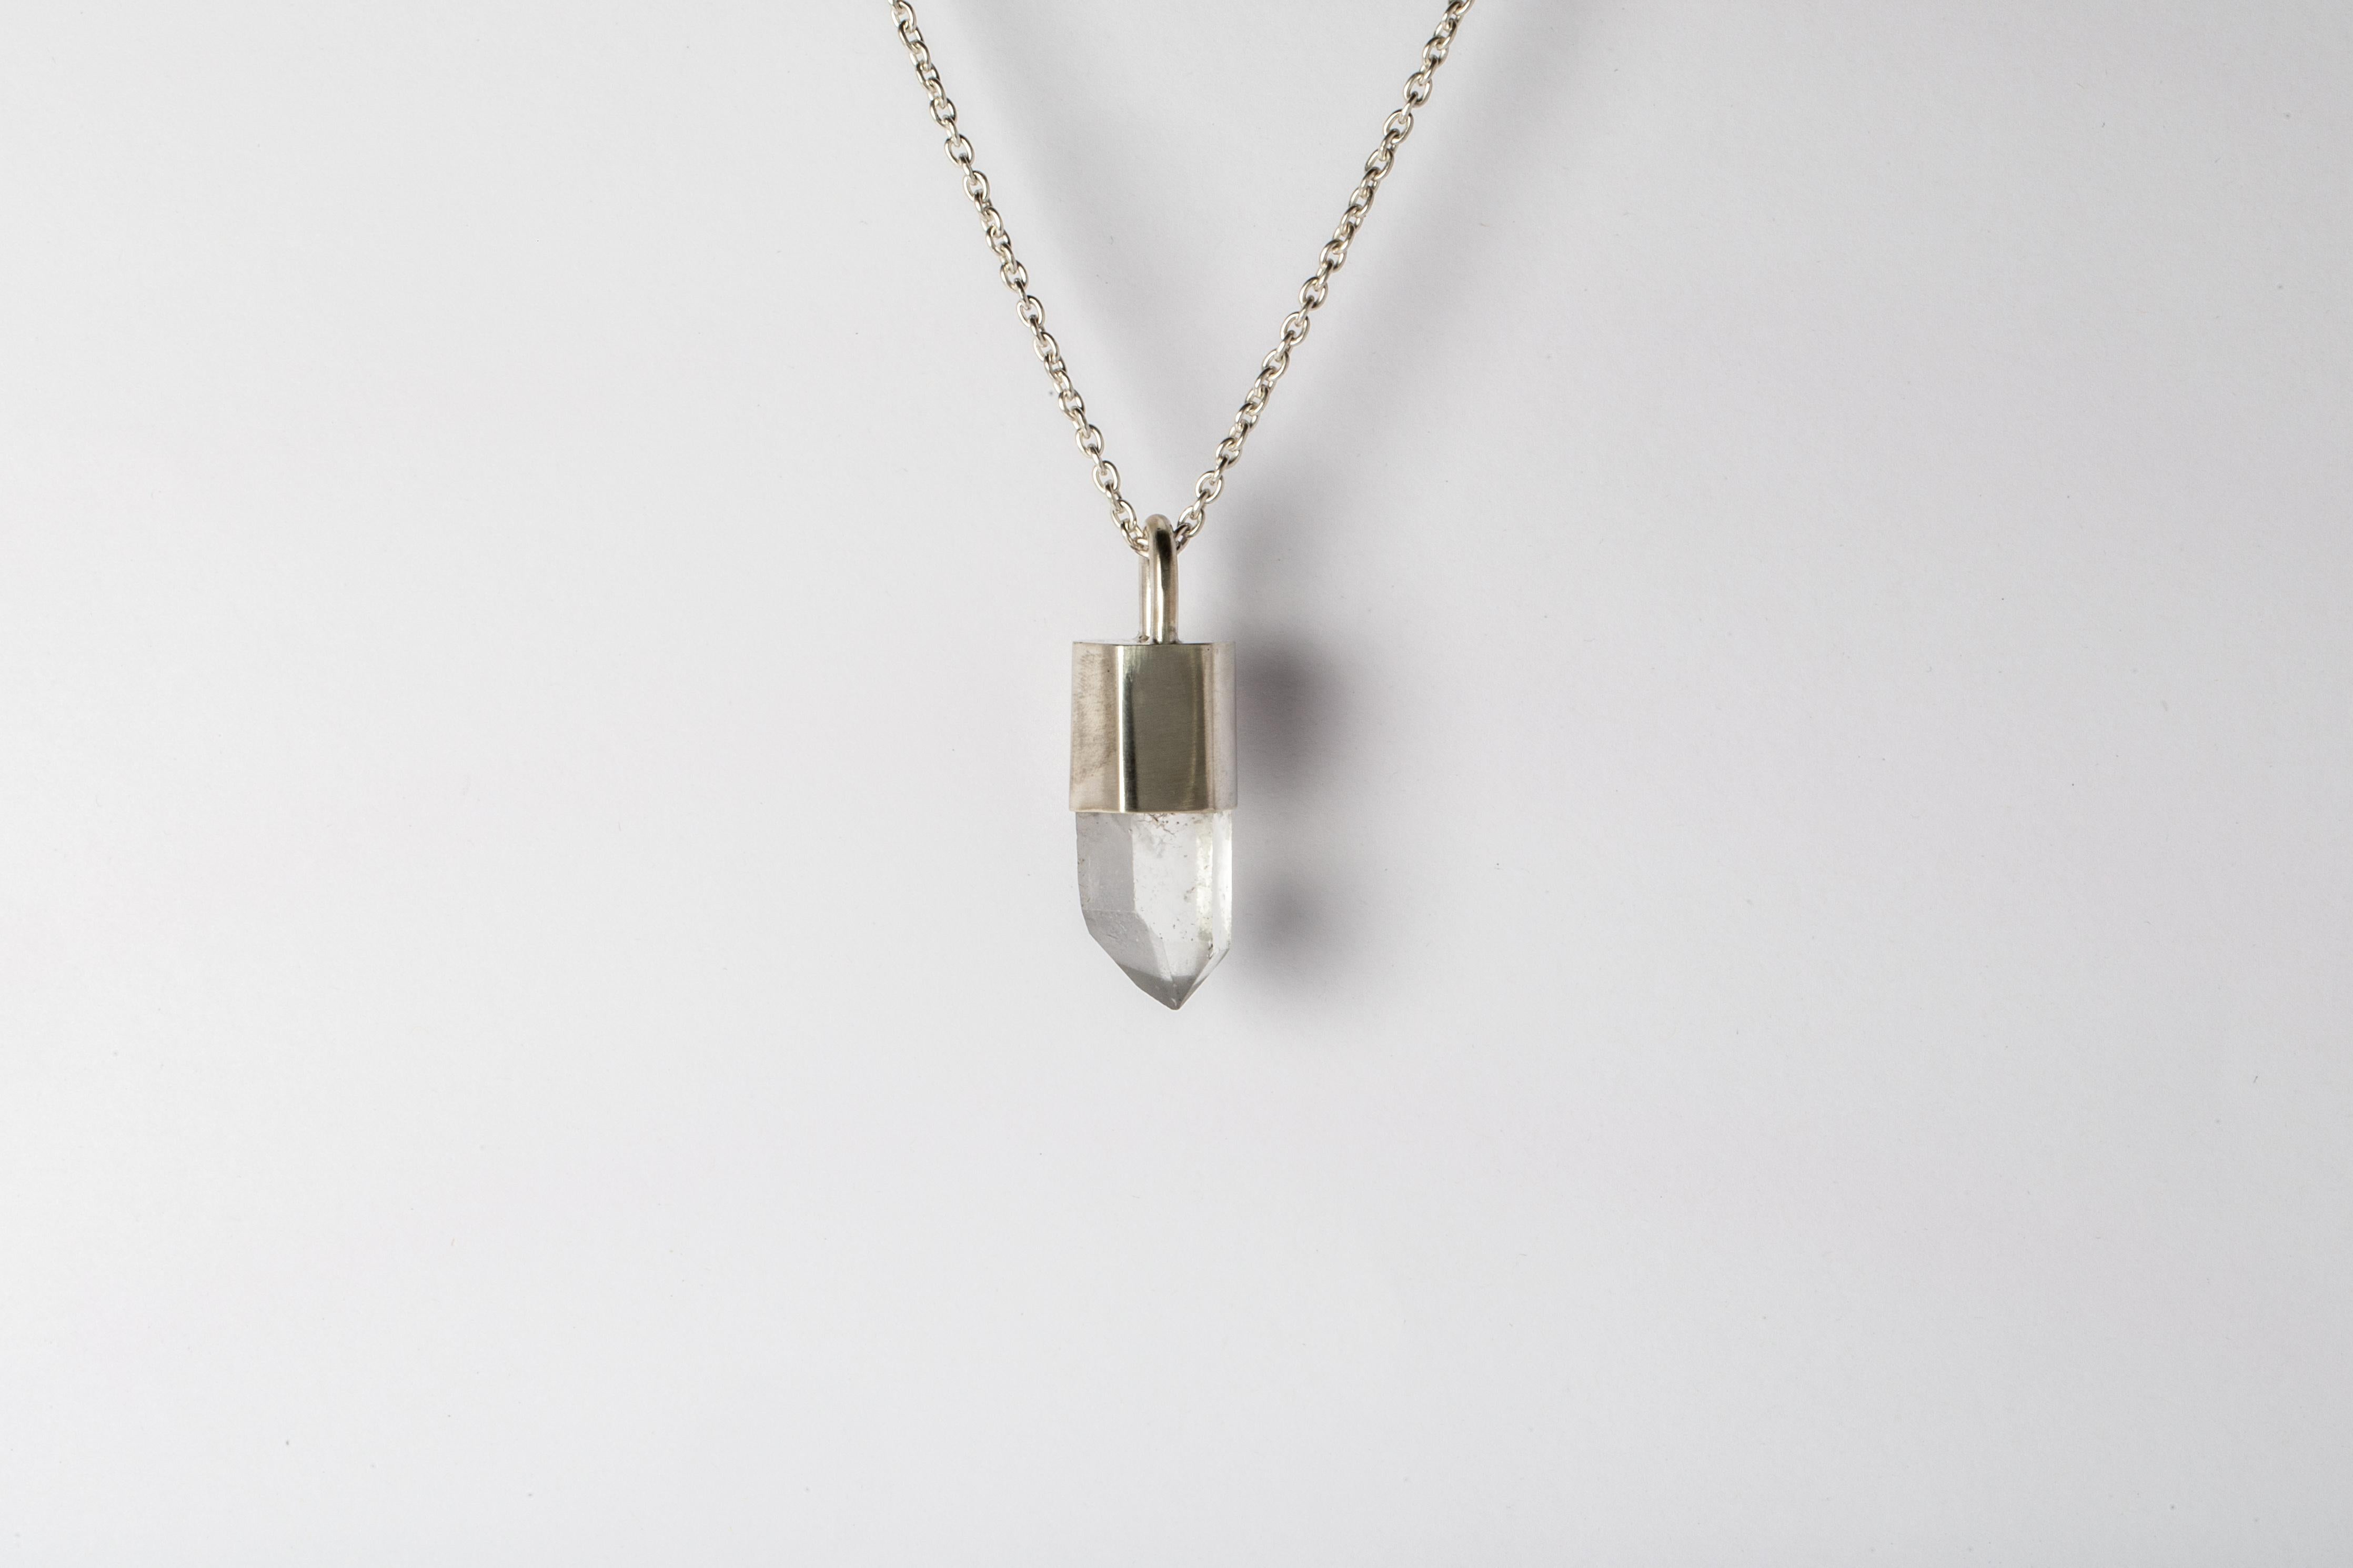 Necklace in matte sterling silver and a rough of misc quartz. It comes on 74 cm sterling silver.
The Talisman series is an exploration into the power of natural crystals. The crystals used in these pieces are discovered through adventure and are